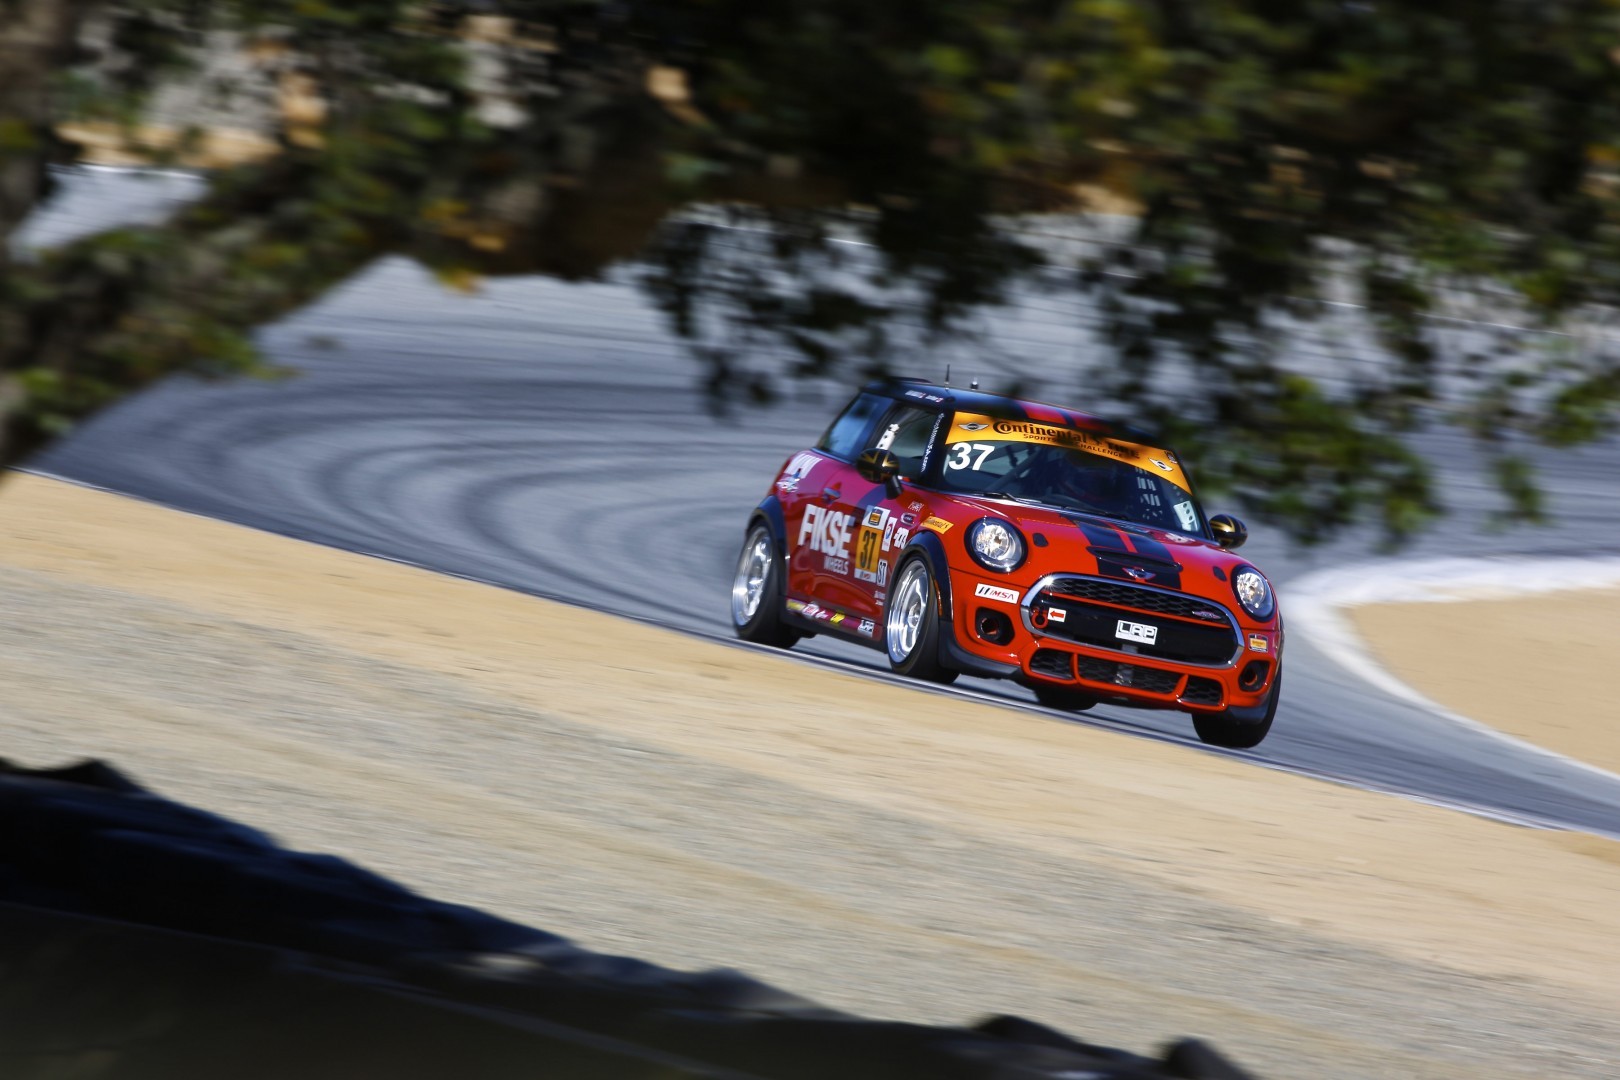 MINI Annouces 2015 Continental Tire SportsCar Challenge Livery